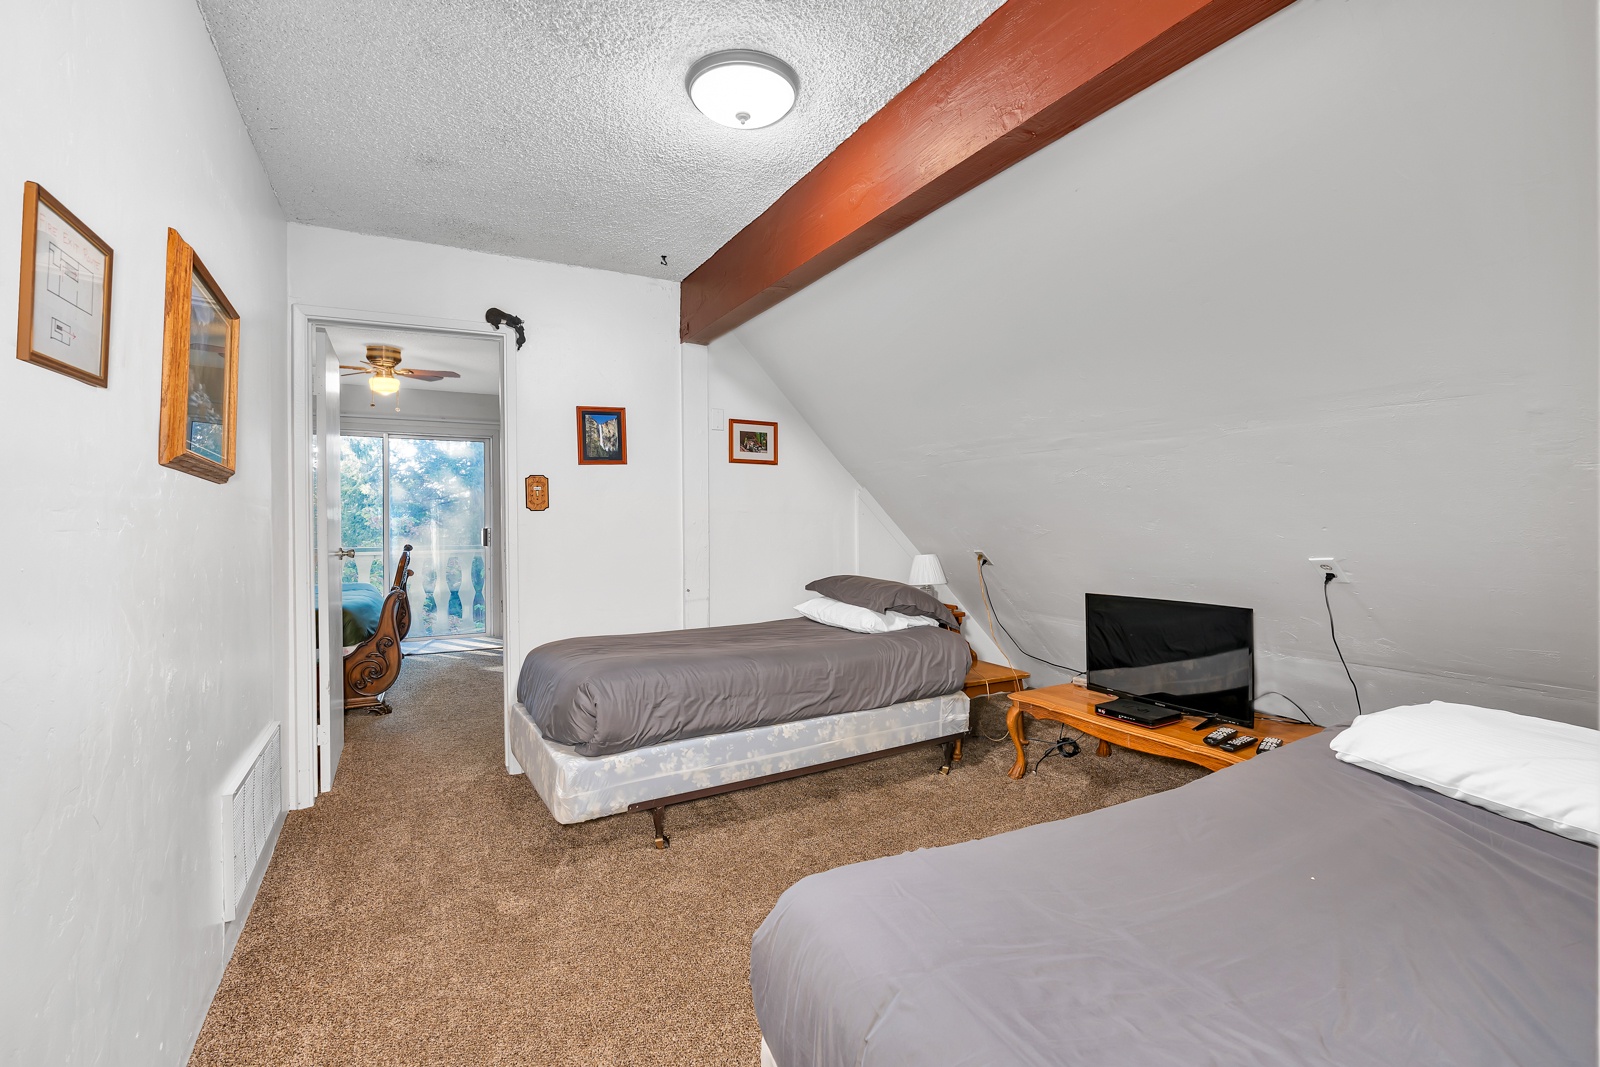 The upper-level loft includes a pair of twin beds, as well as a queen bed